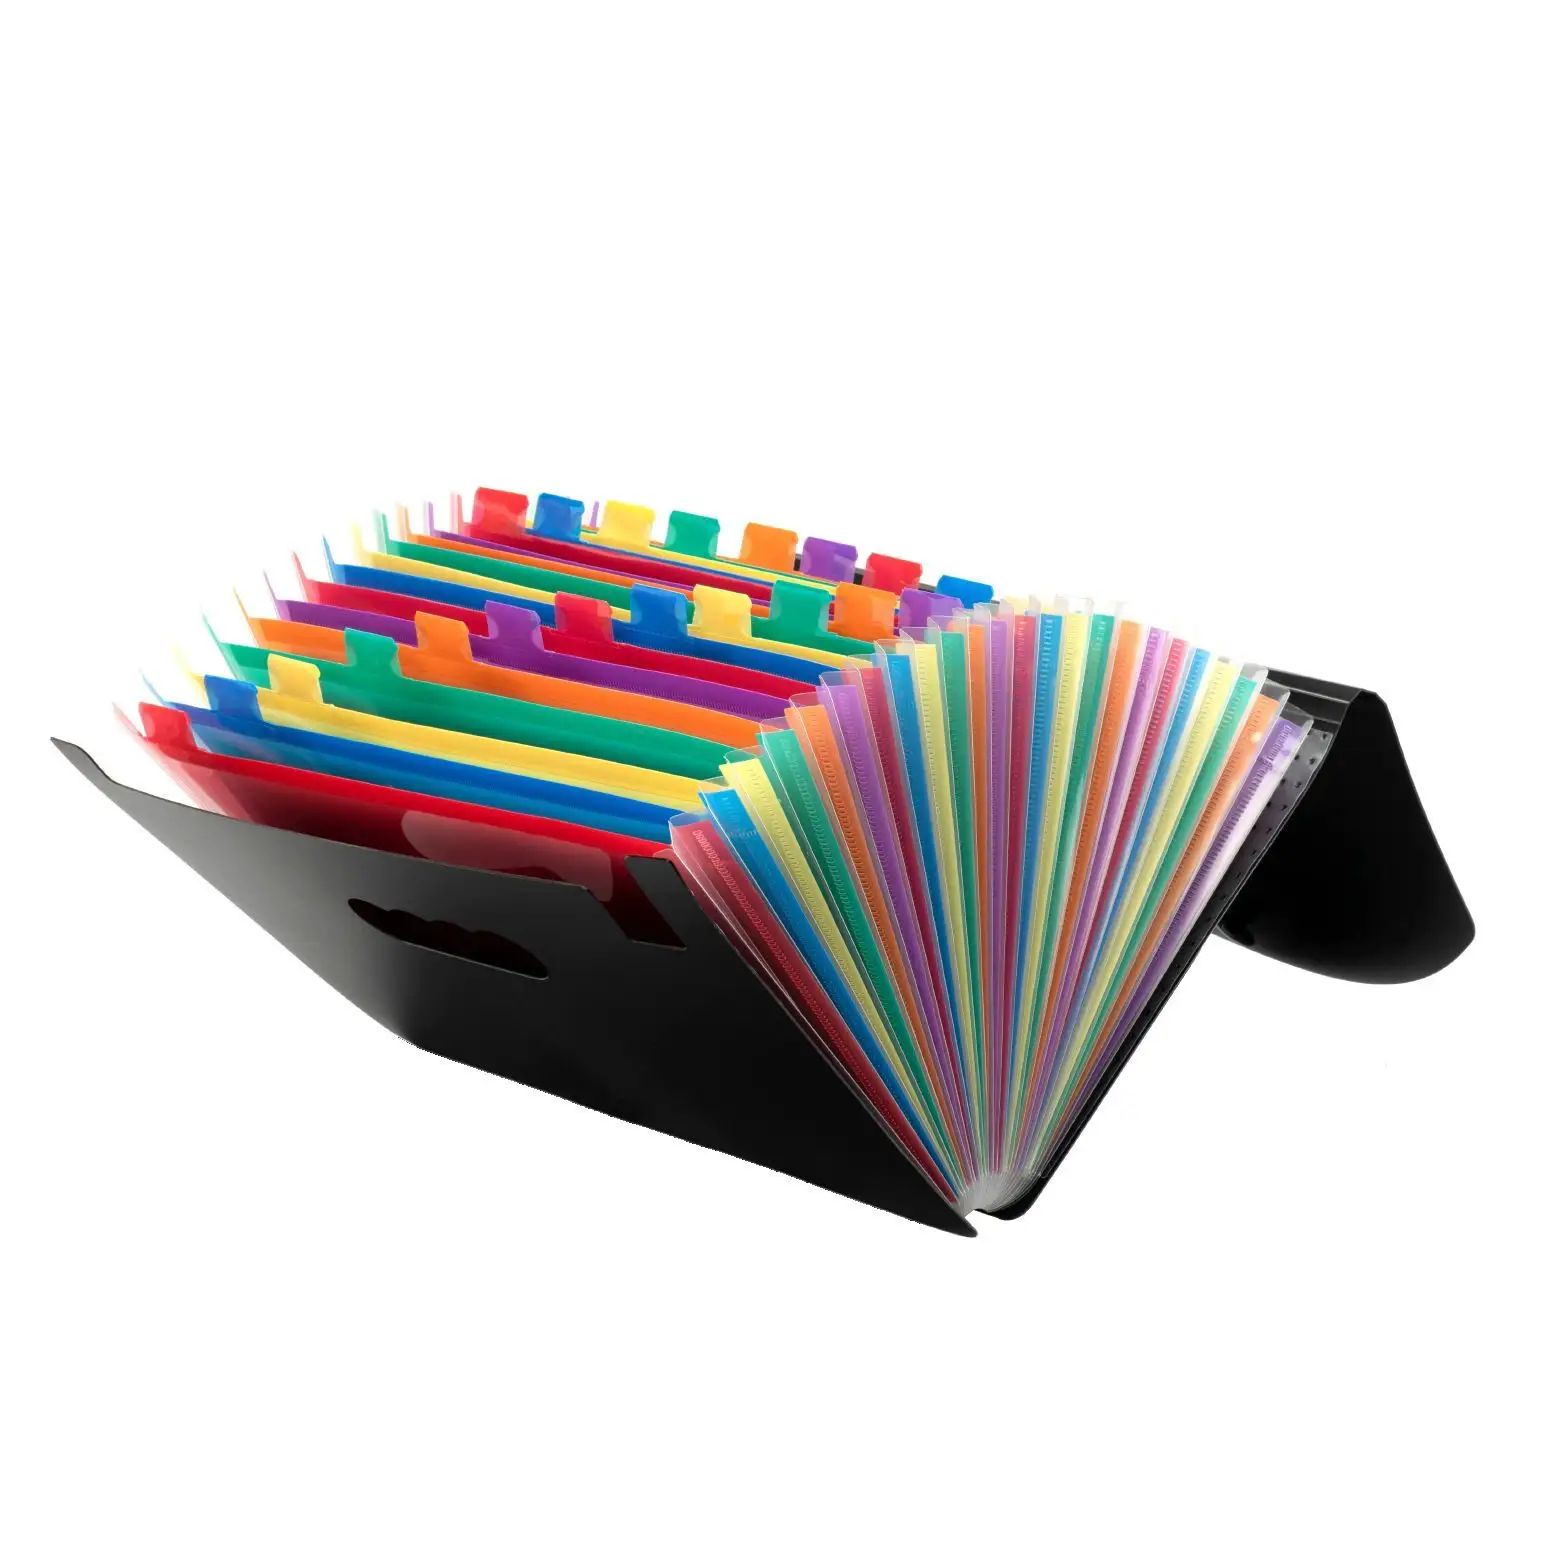 24 Pockets Accordion File Organizer Expanding File Folder With Colored Tabs